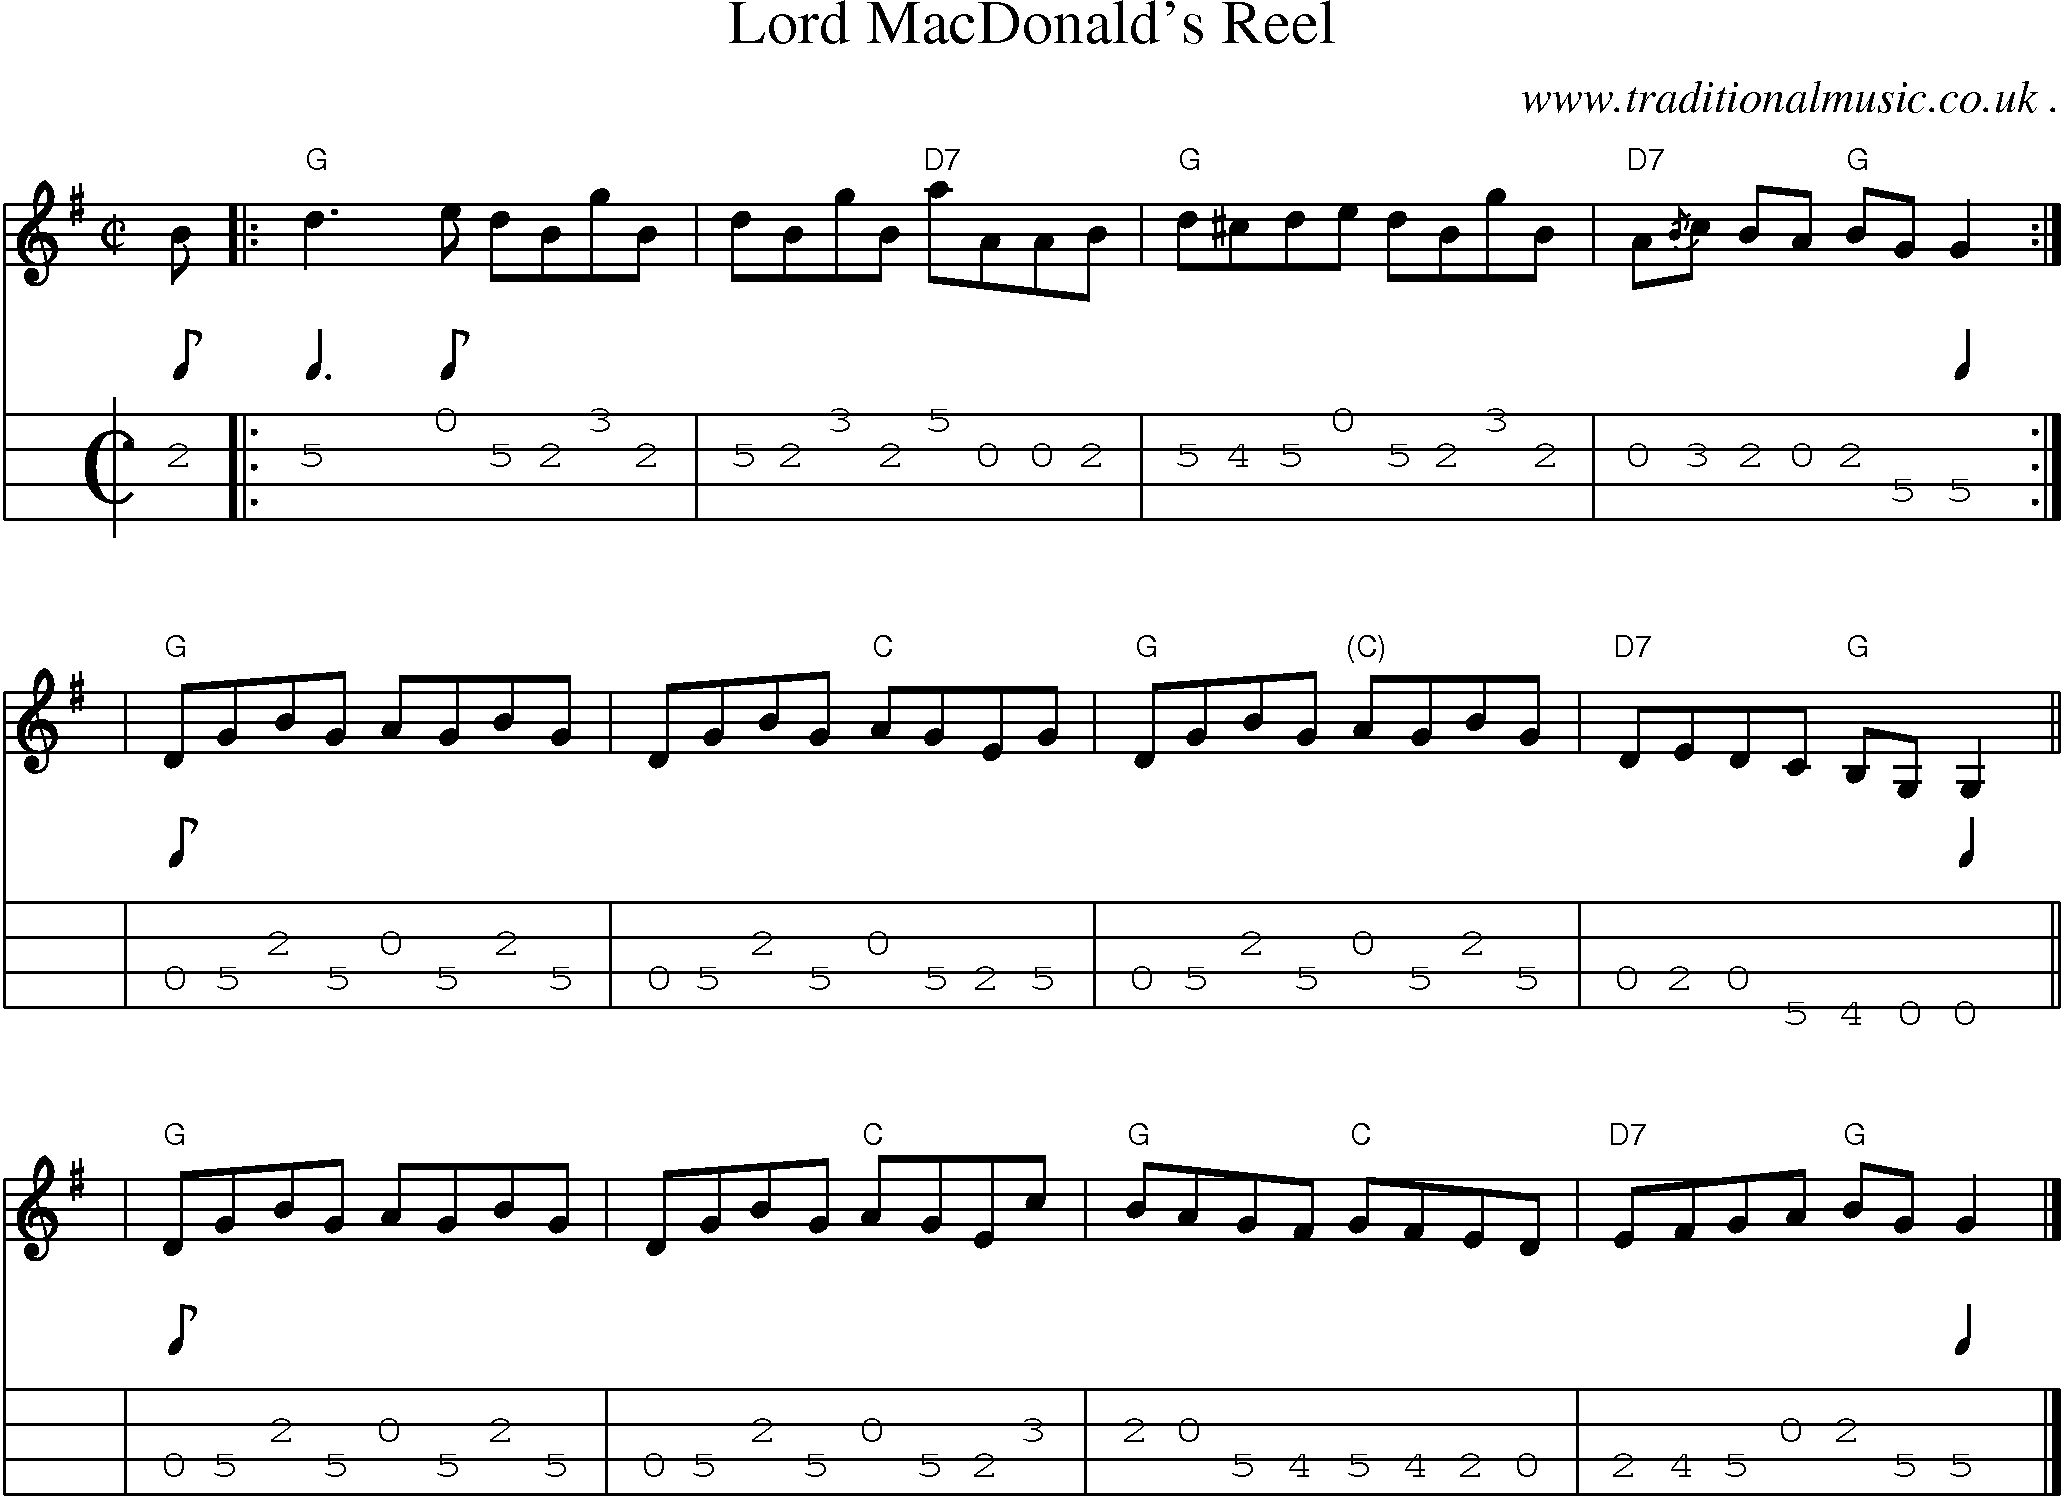 Sheet-music  score, Chords and Mandolin Tabs for Lord Macdonalds Reel